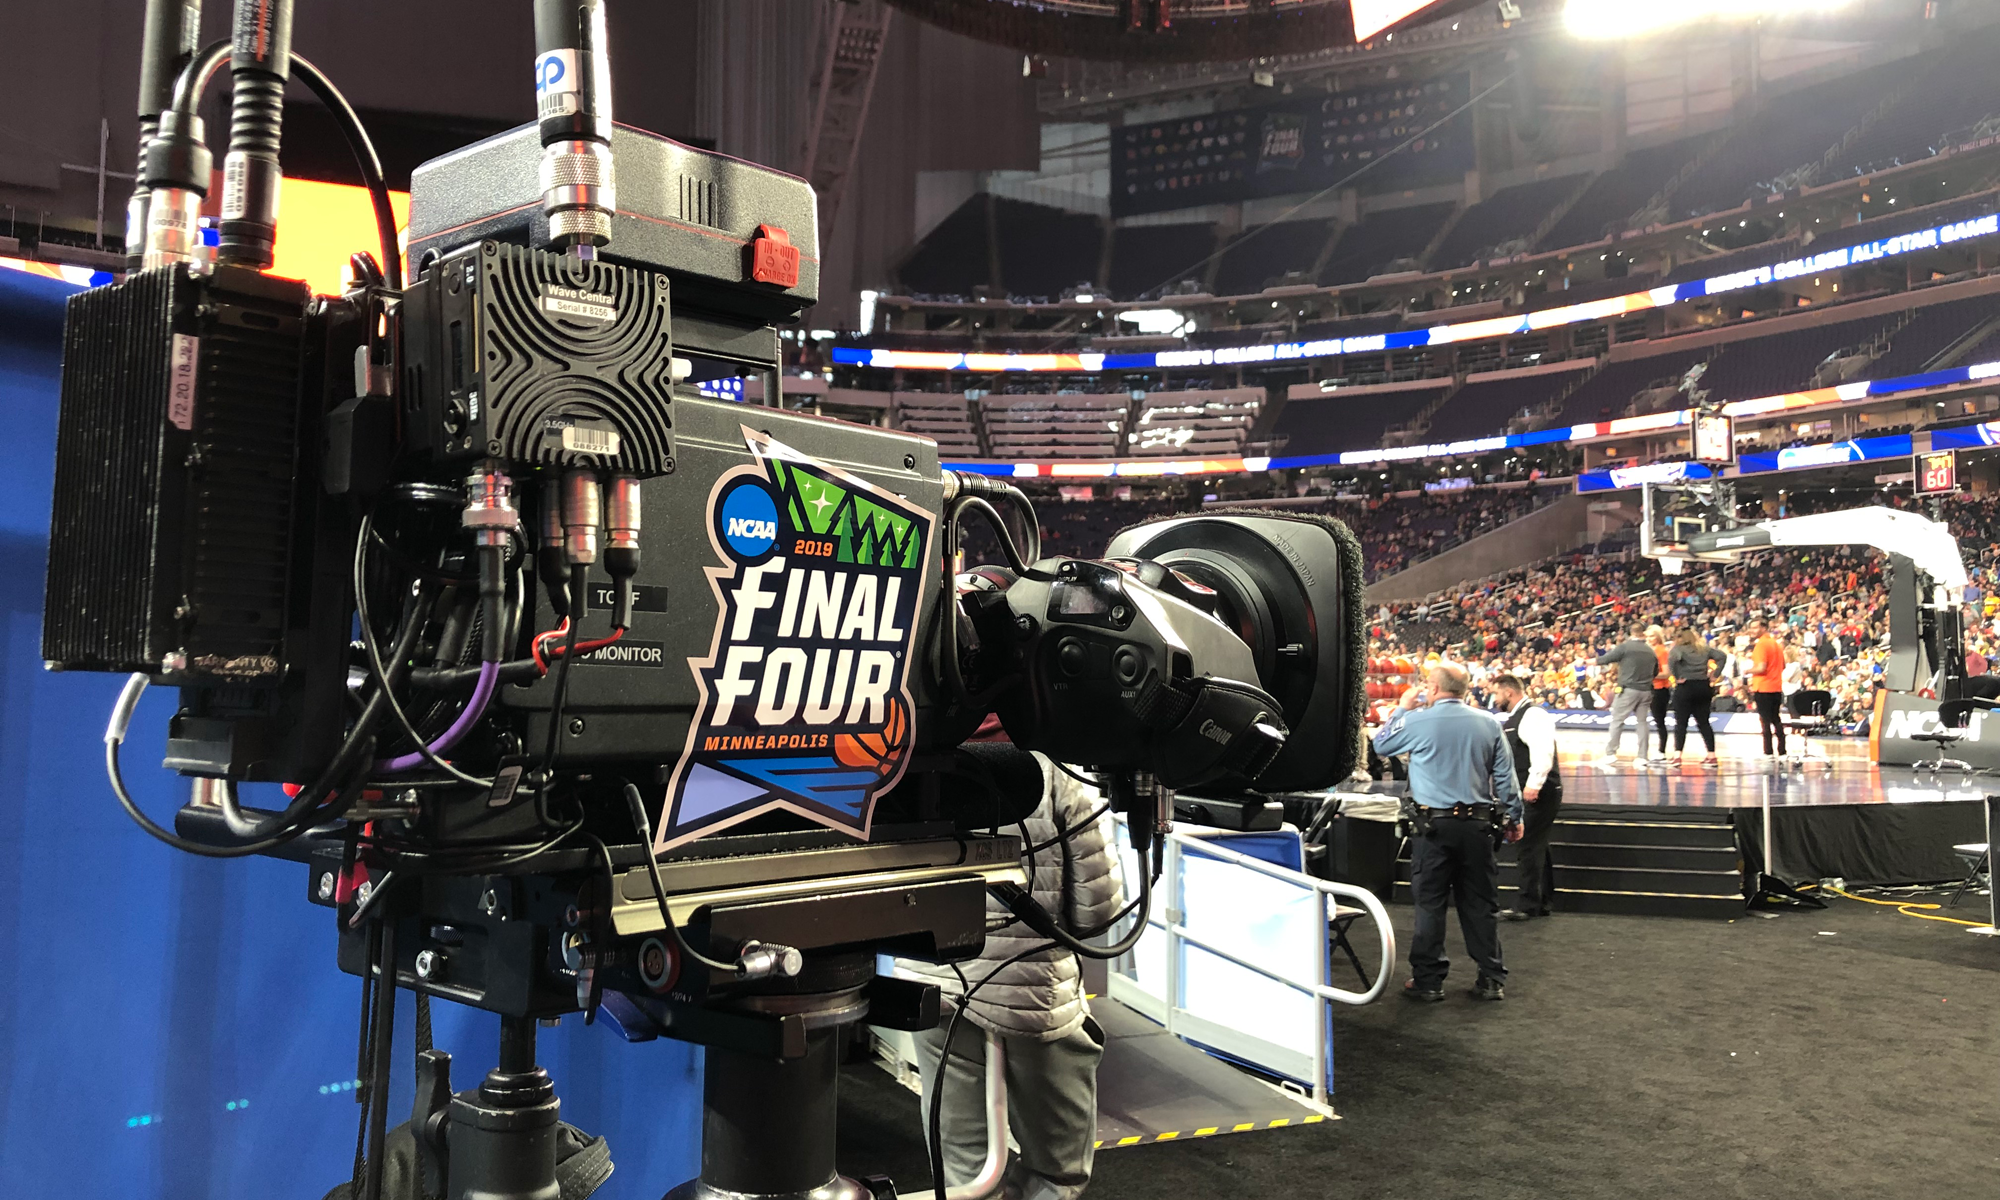 Live From Final Four For CBS and Turner, One of the Years Biggest Productions Sings a Familiar – Albeit Epic